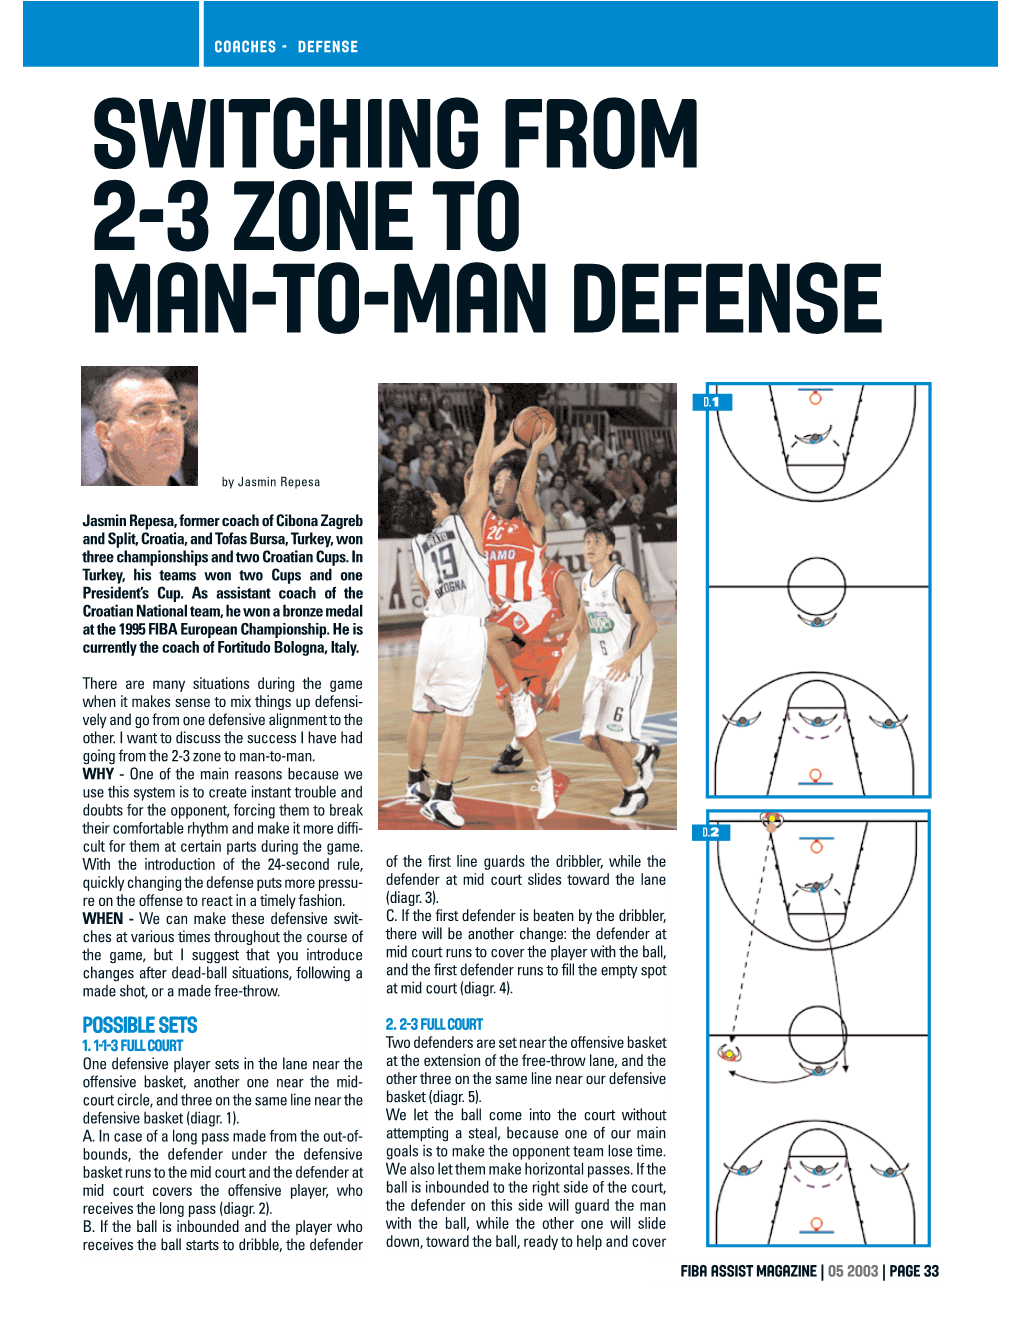 Switching from 2-3 Zone to Man-To-Man Defense